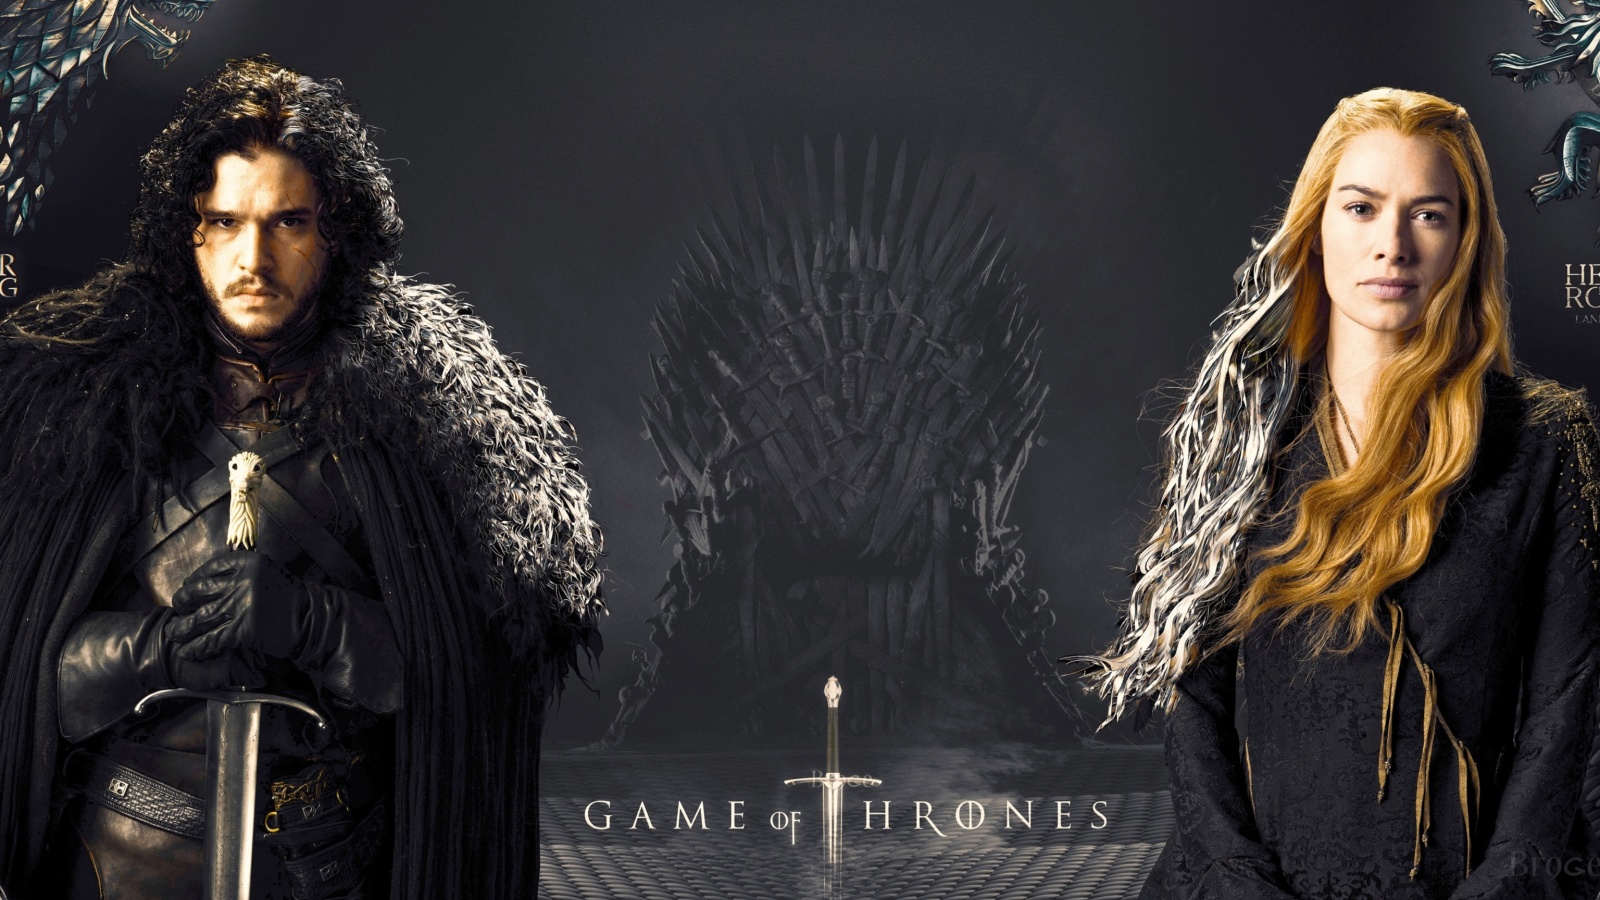 Game Of Thrones actors Jon Snow and Cersei Lannister screenshot #1 1600x900